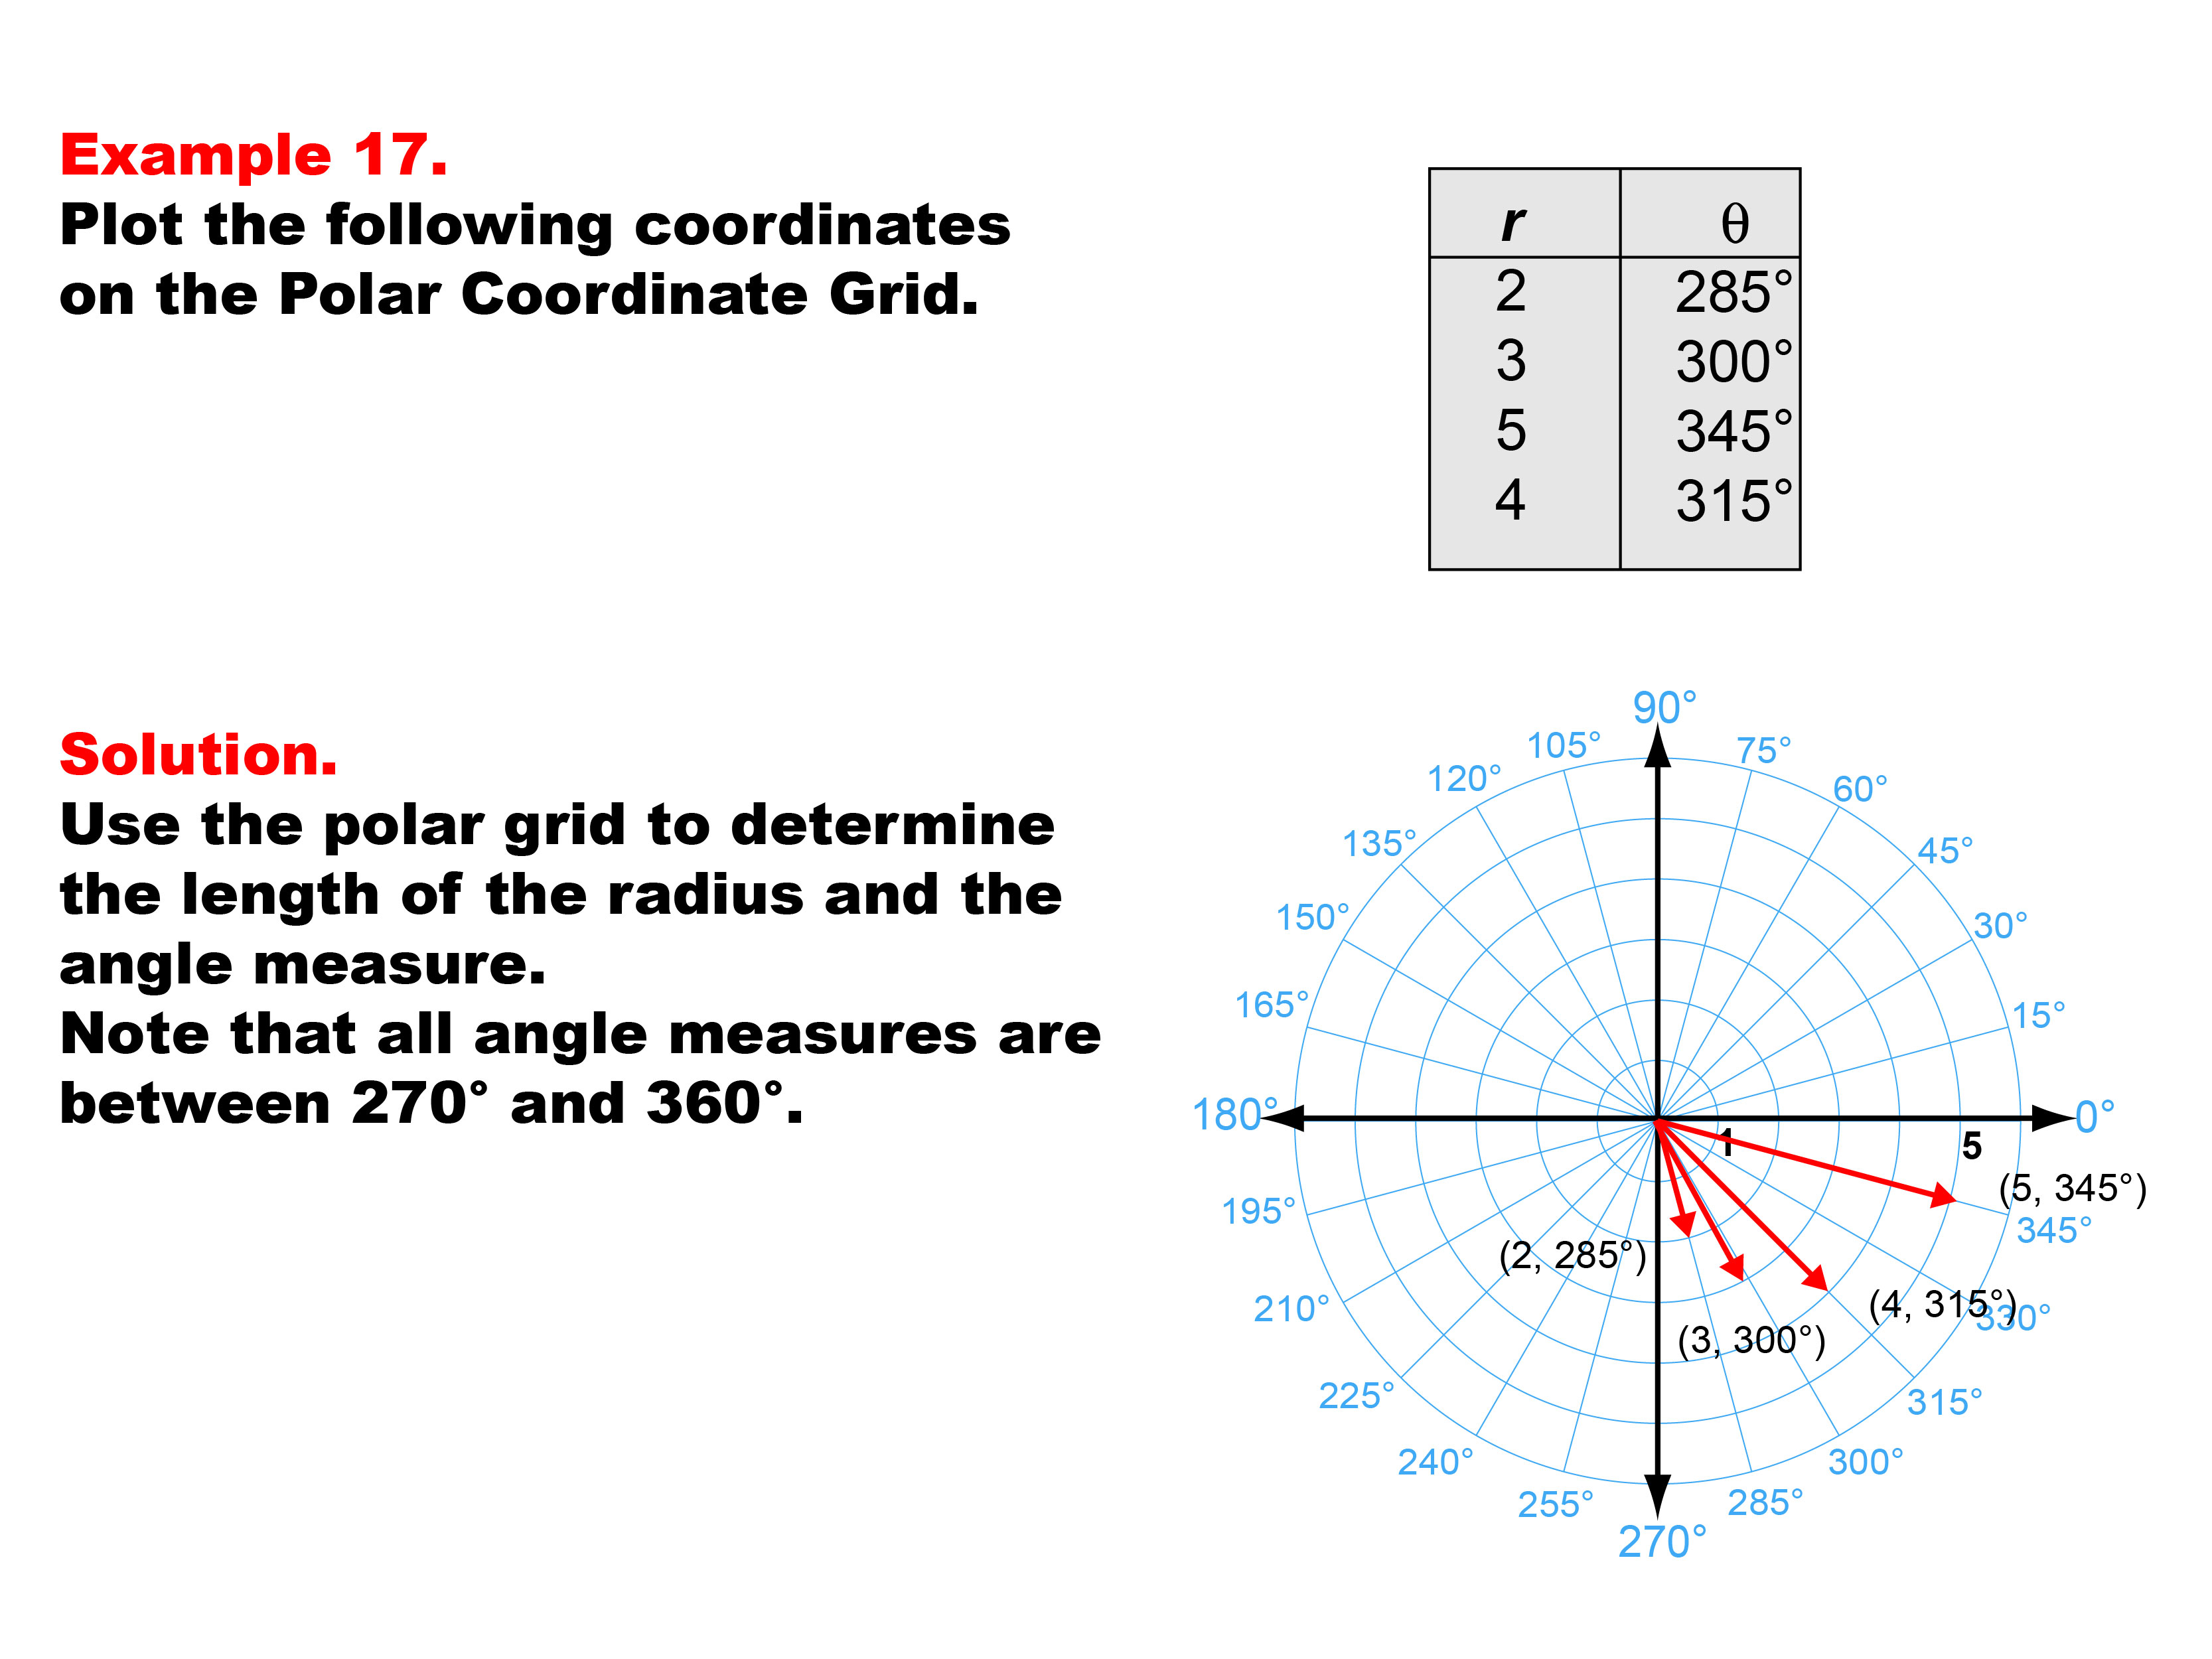 Coordinate Systems: Example 17. Graphing coordinates on the Polar Coordinate System for angles greater than 270 degrees and less than 360 degrees.